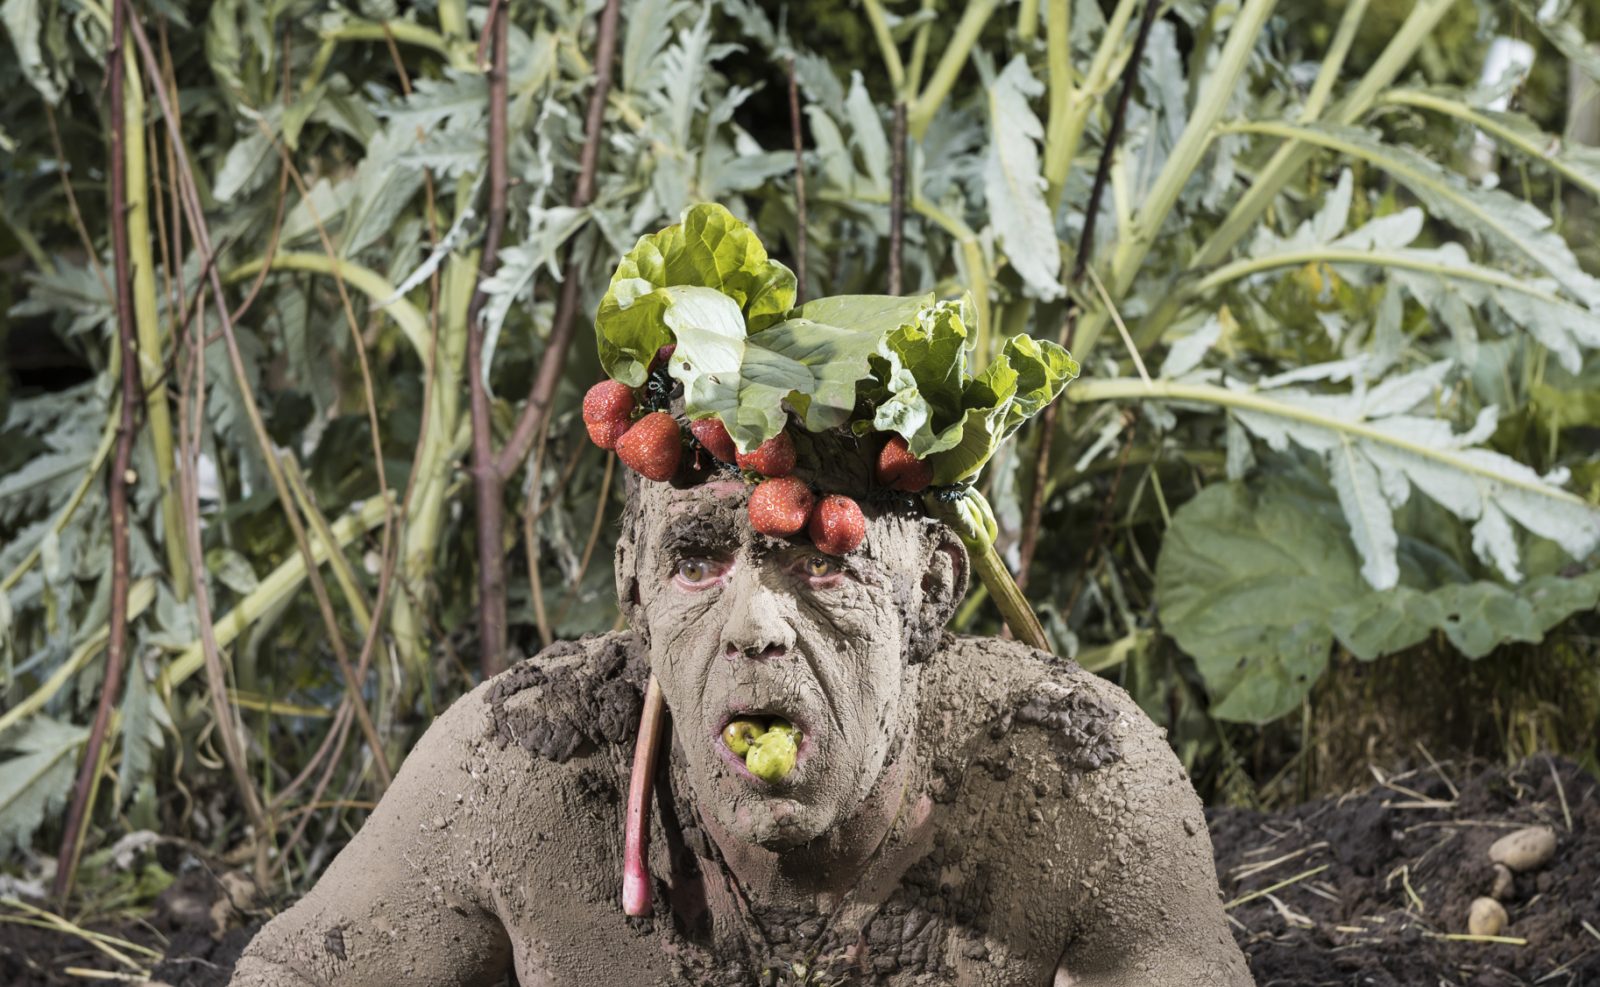 A man covered in soil and wearing a crown of strawberries is climbing out of the ground. He is surrounded by soil, potatoes and vegetables growing in the ground. He is holding beetroot in one hand, and has green tomatoes in his mouth.